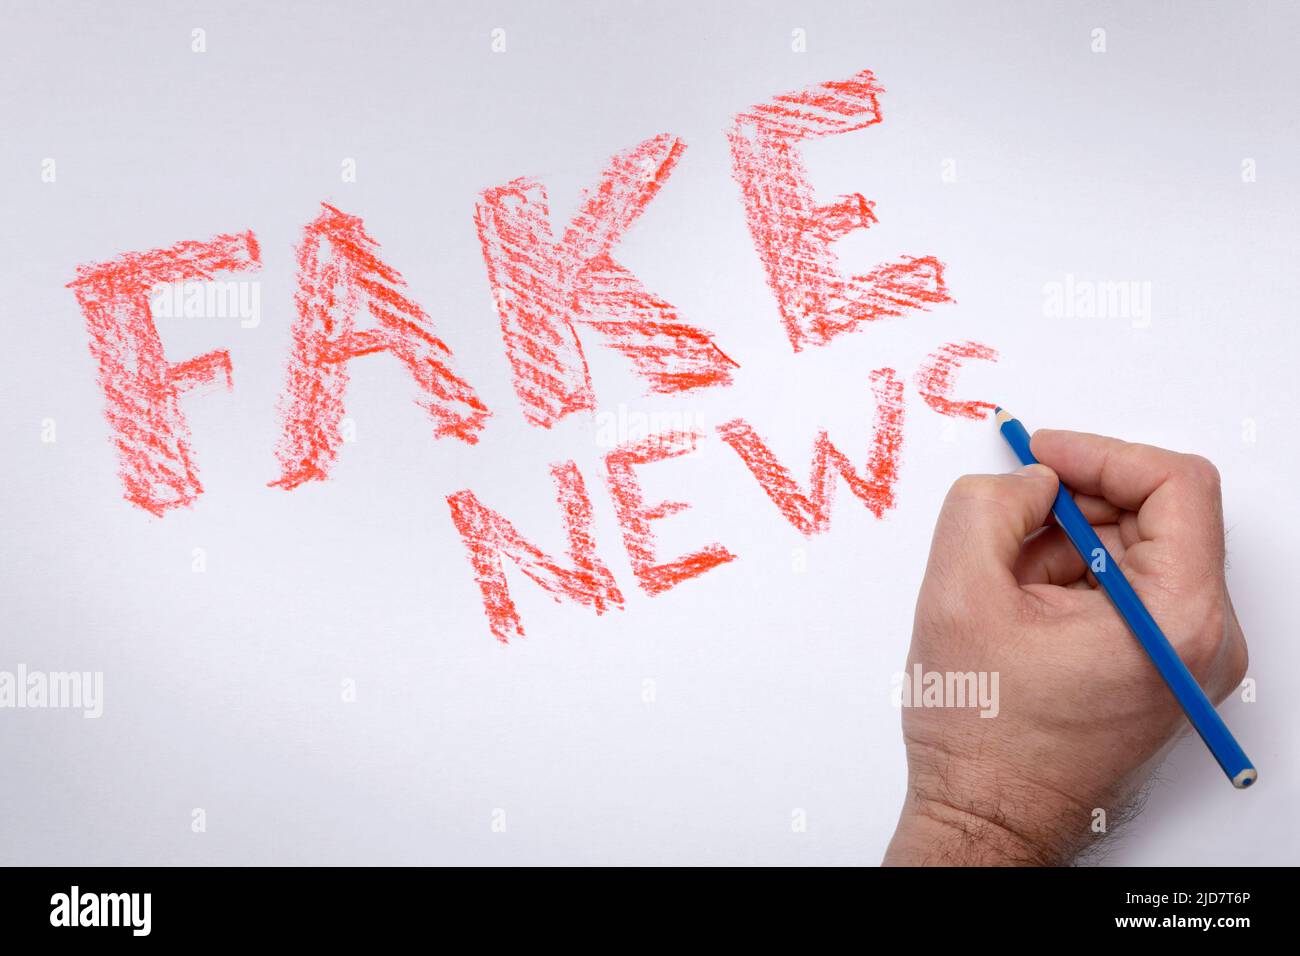 Lettering FAKE NEWS. Inscription FAKE NEWS is red, drawn with a blue pencil on a white background. Hand writing lettering FAKE NEWS. Propaganda in media. Substitution of concepts. Handdraw lettering. Stock Photo